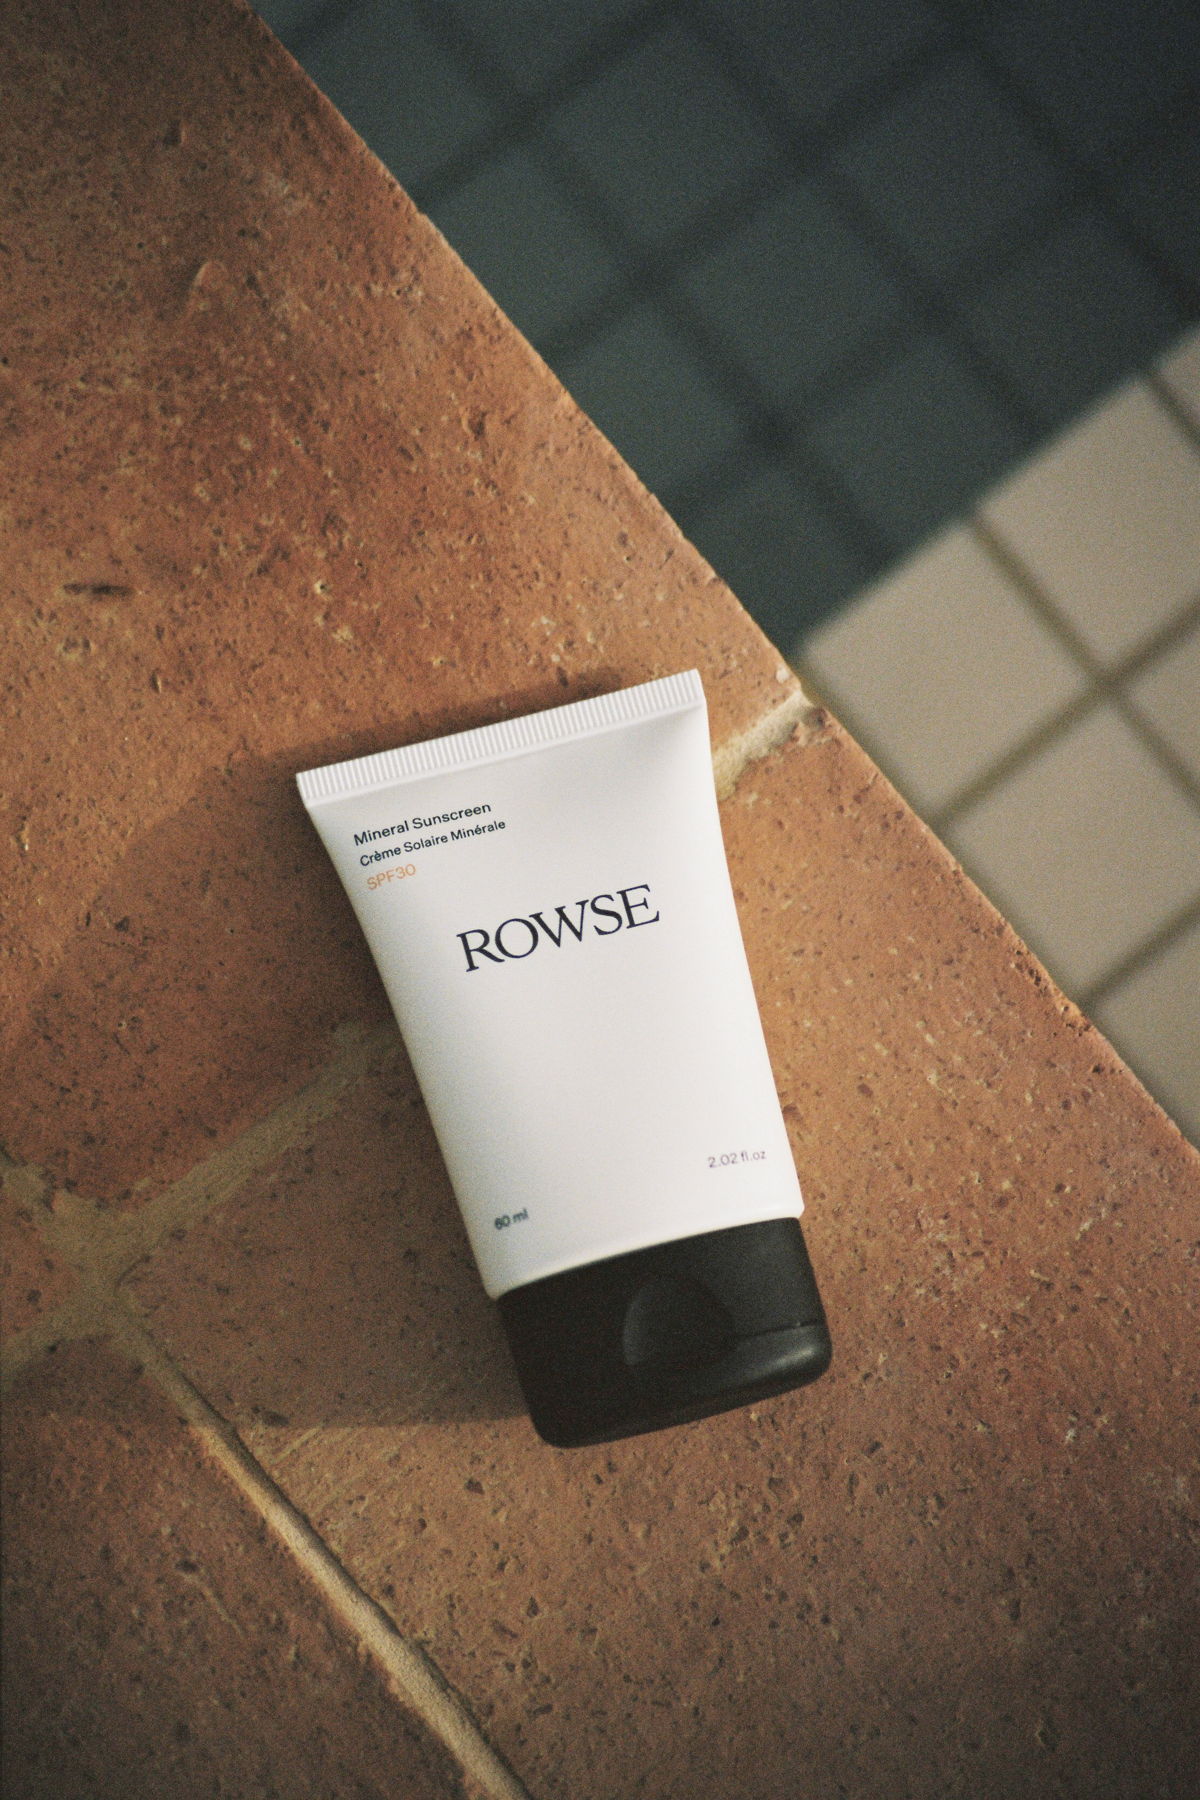 ROWSE, Mineral Sunscreen, € 45,-